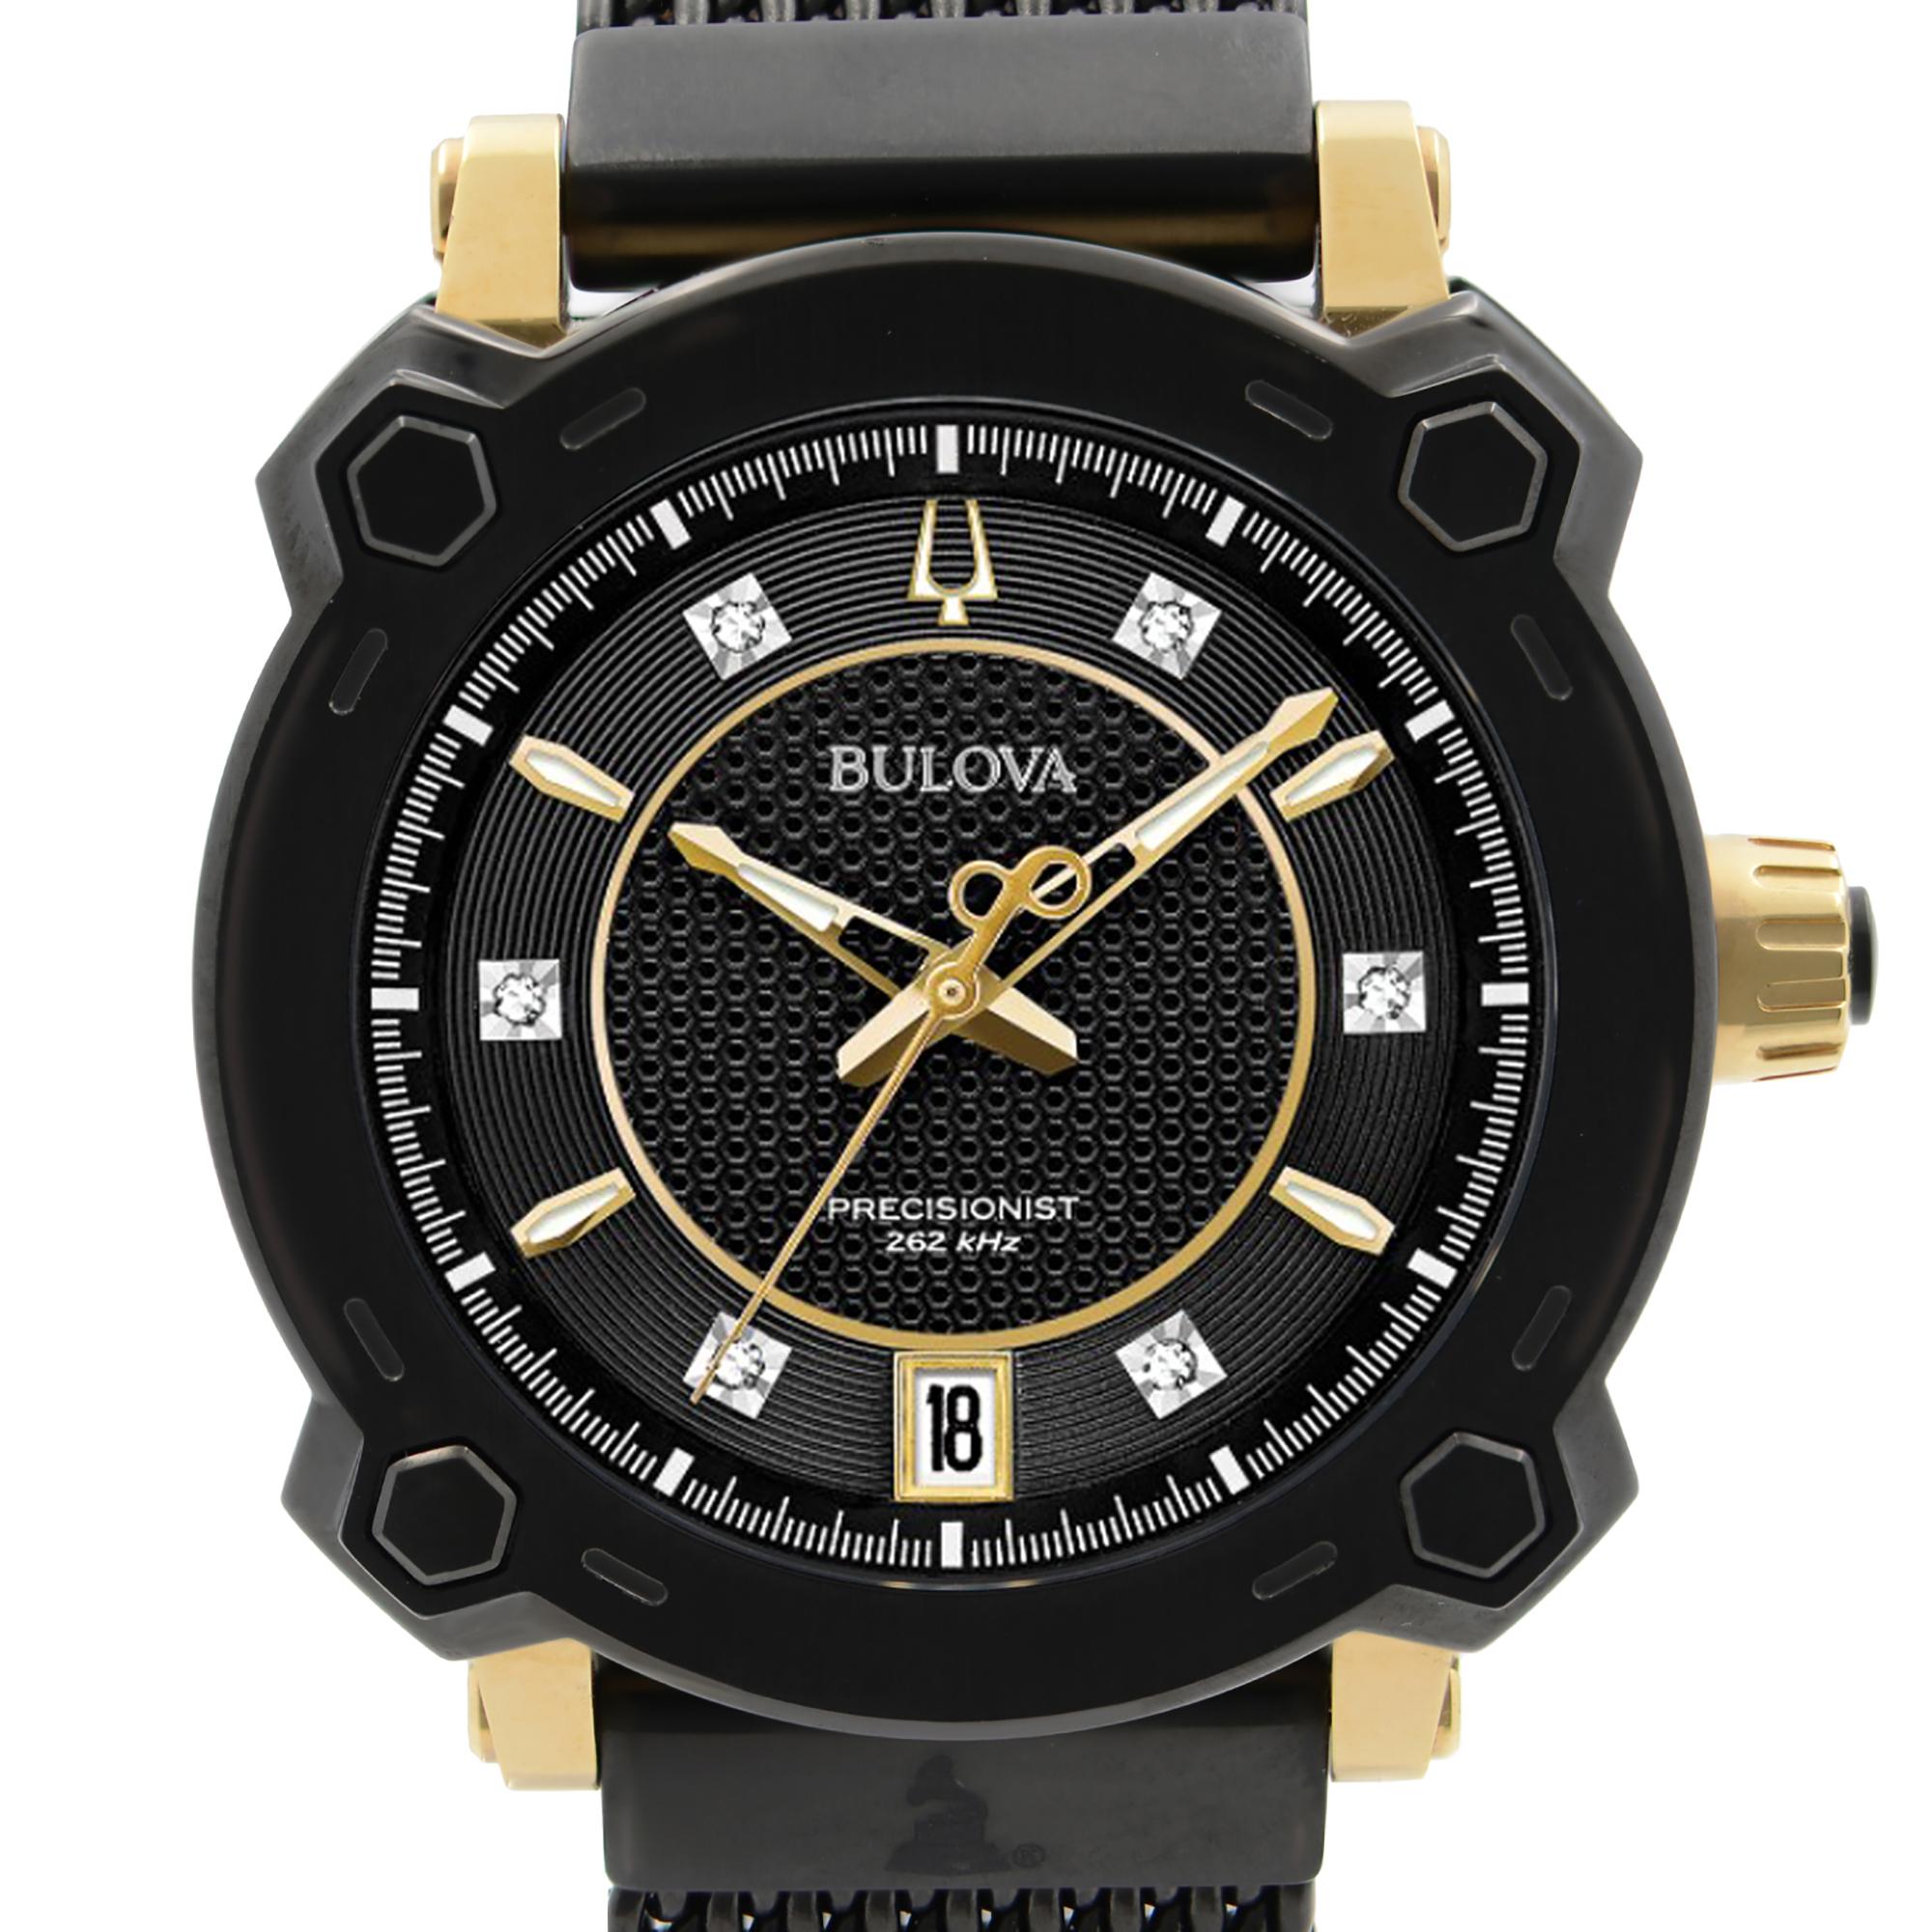 Display Model Bulova Precisionist Grammy Steel Black Diamond Dial Ladies Quartz Watch 98P173. The Watch Has Minor Blemishes Due To Storing. This Beautiful Timepiece Features: Yellow Gold-Tone and Black IP Stainless Steel Case with a Black IP